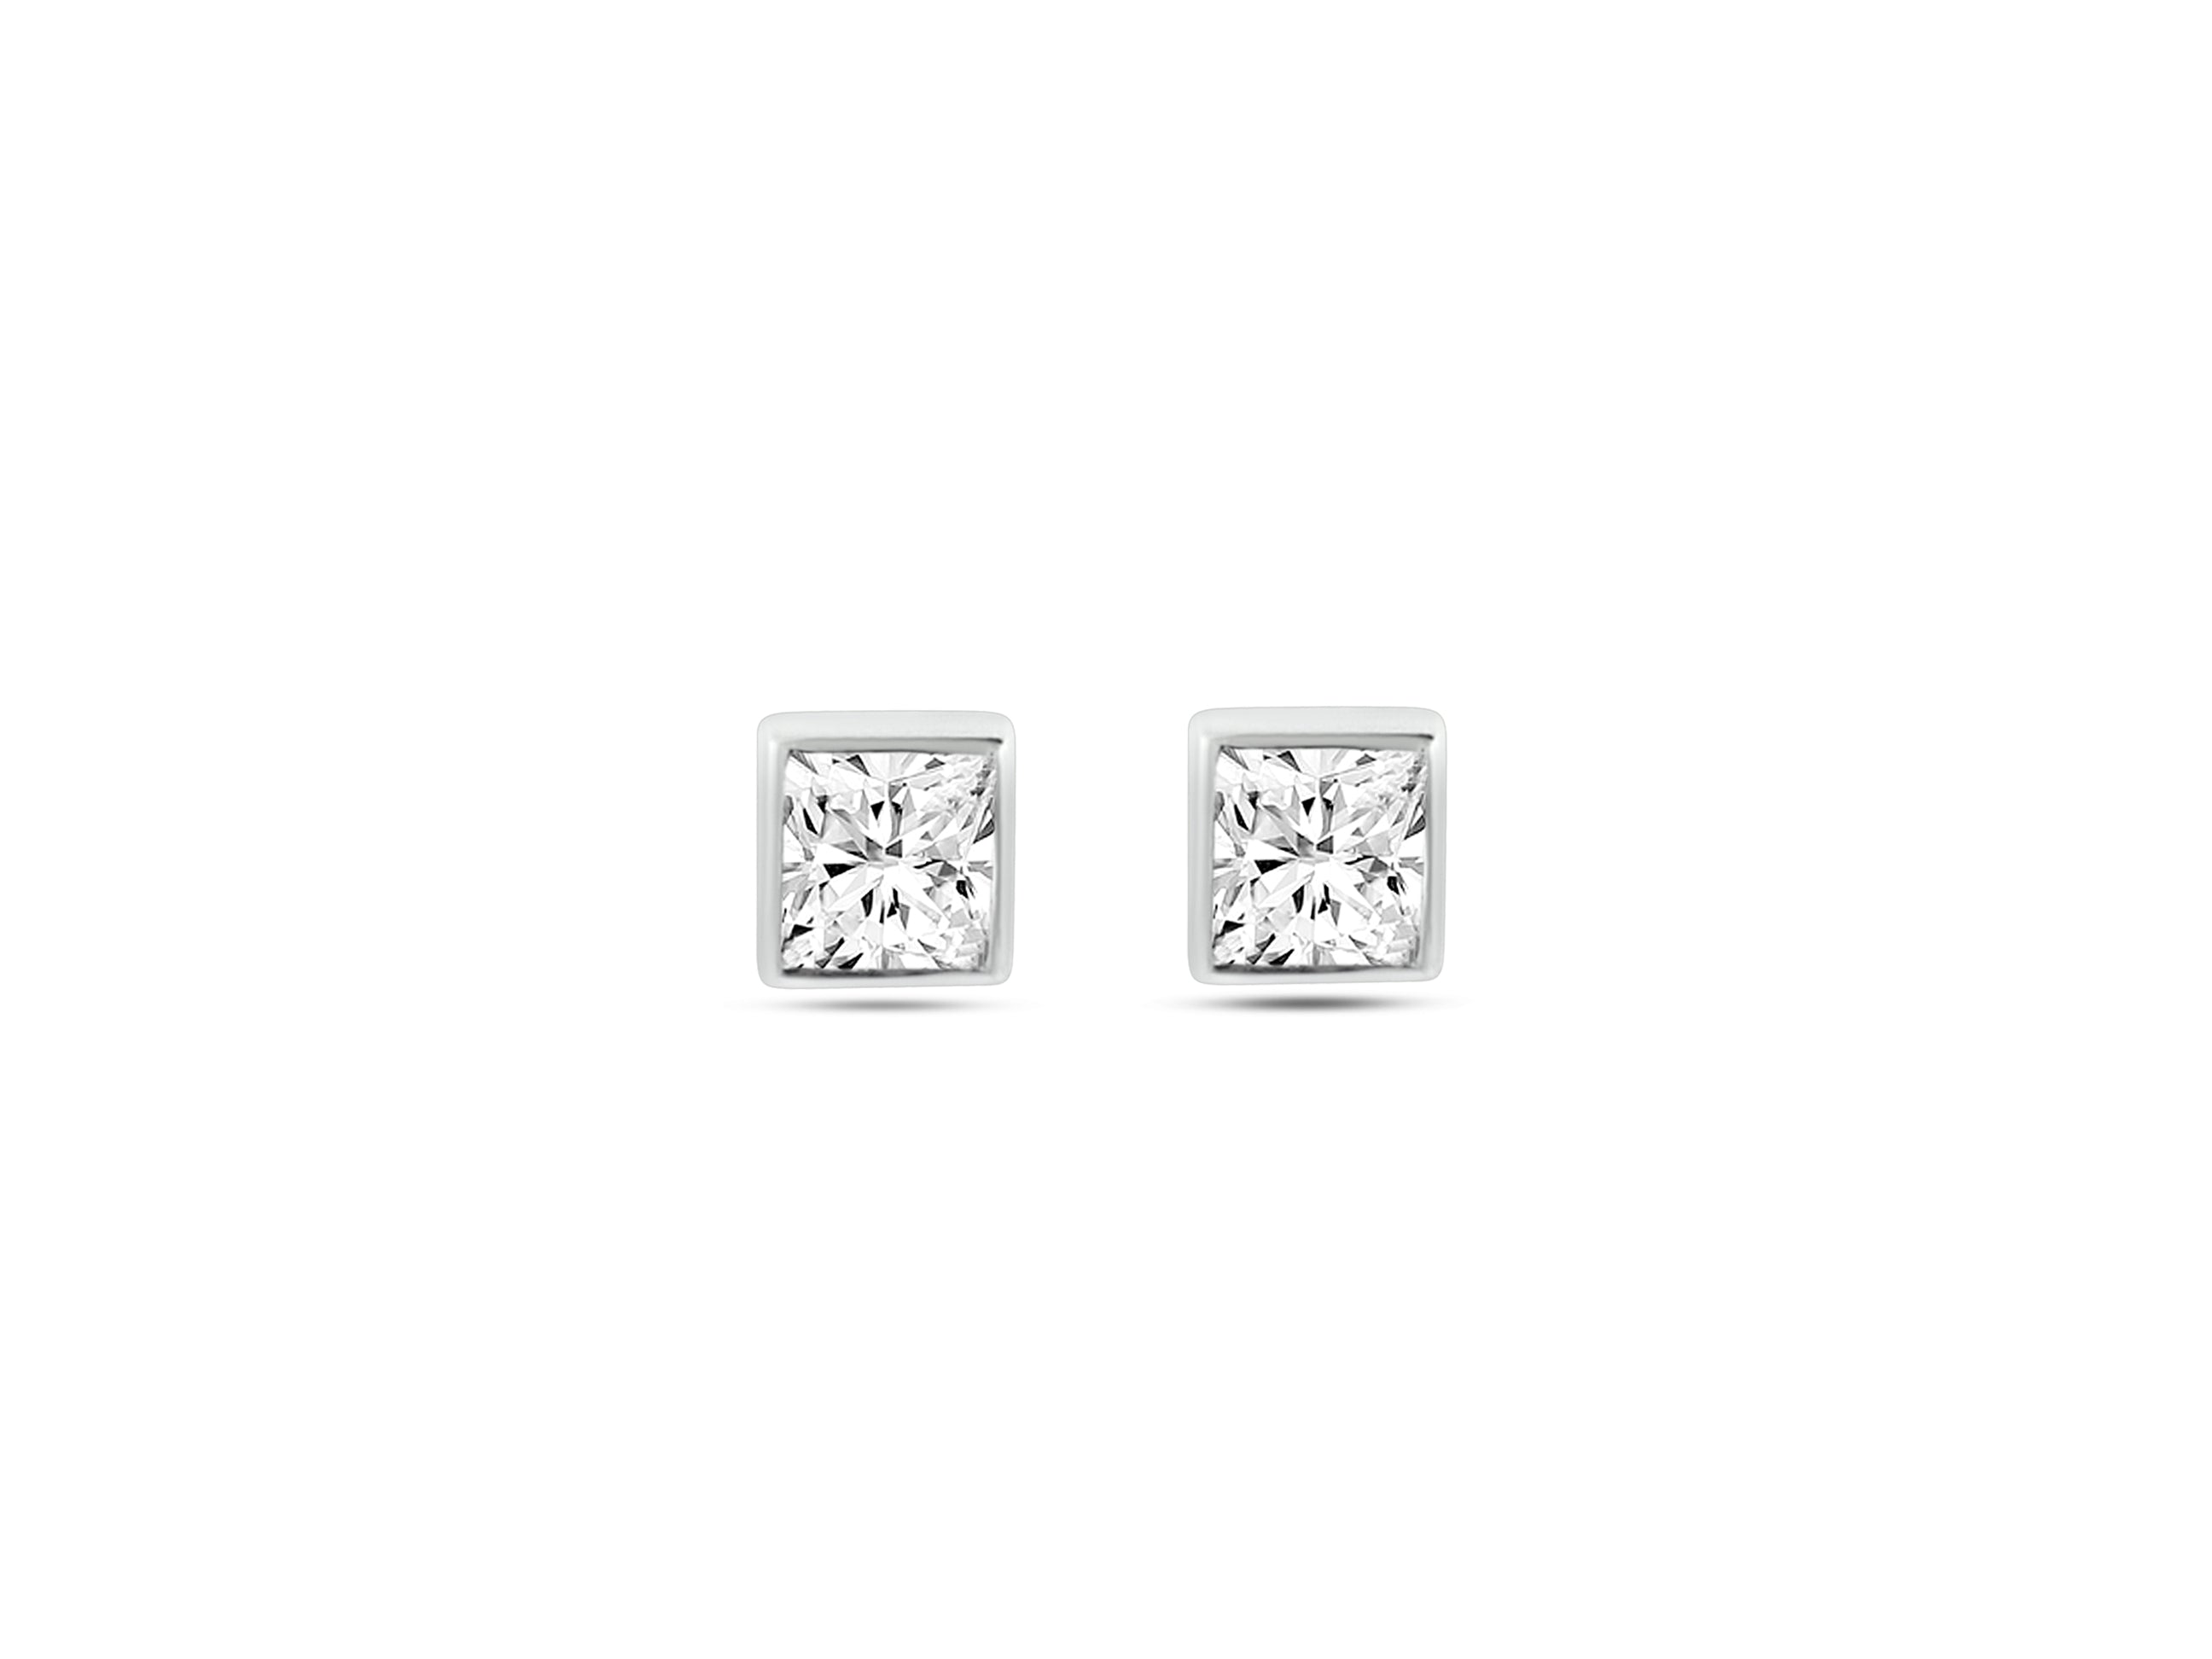 MULLOYS PRIVE'18K WHITE GOLD .35CT SI1 CLARITY G COLOR PRINCESS BEZEL STUDS